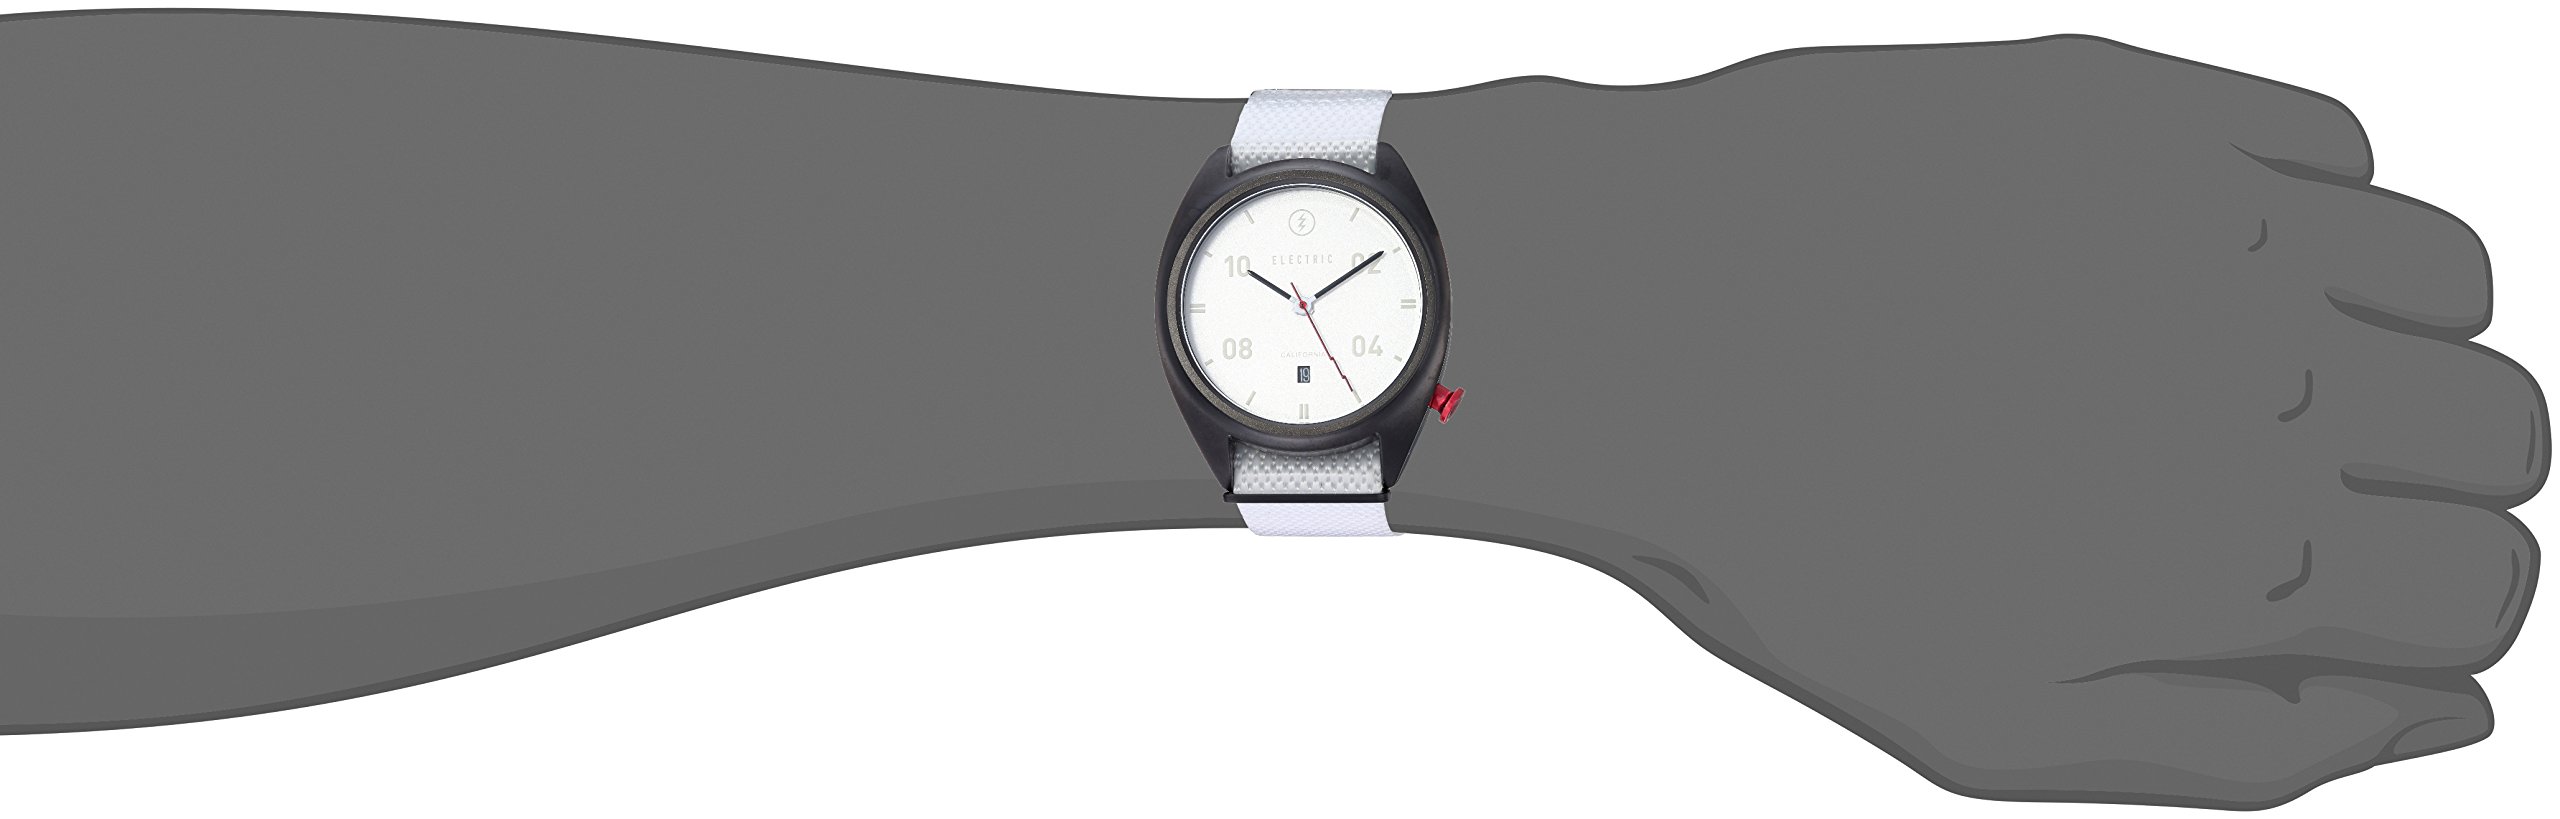 Electric Stainless Steel Japanese-Quartz Watch with Nylon Strap, White, 19 (Model: EW015008-0051)